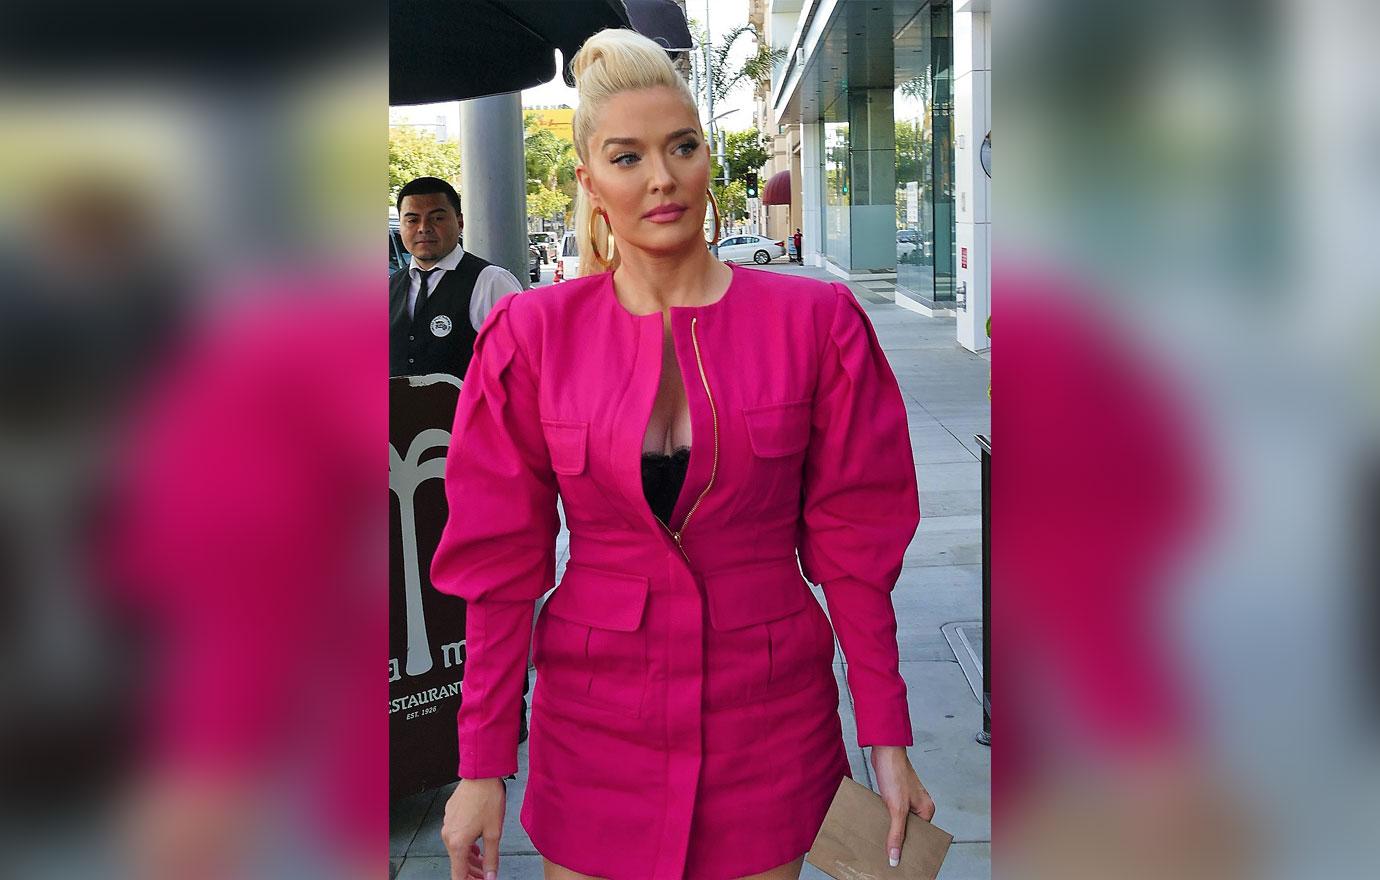 RHOBH's Erika Jayne ditches glam & shouts 'I don't give a f**k' about  costars questioning her 'lies' after legal scandal